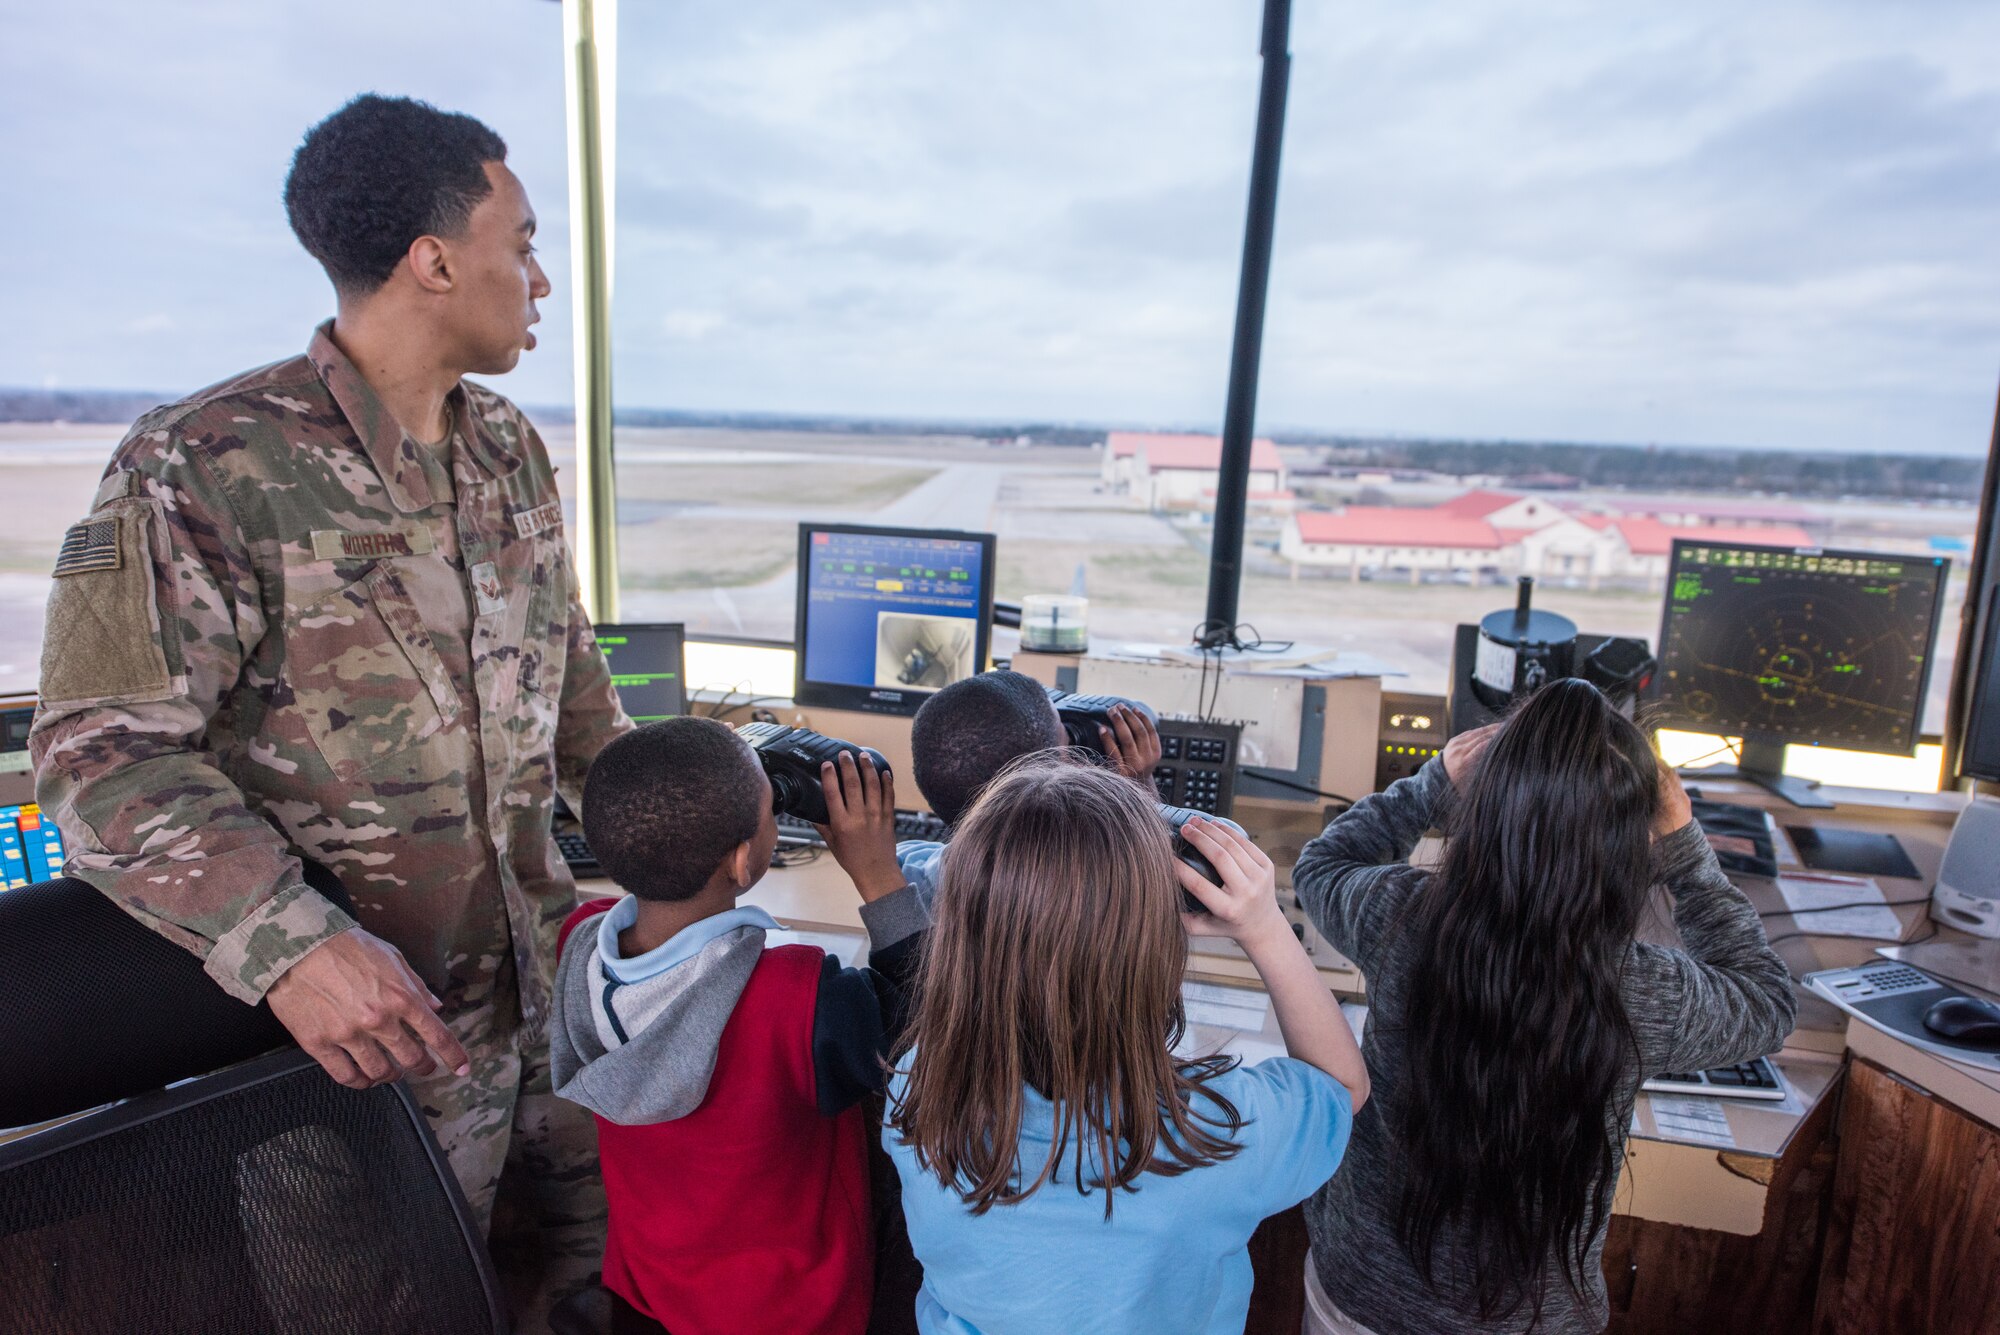 Senior Airman Anthony Morris, 42nd Operational Support Squadron air traffic controller, demonstrates the job of an air traffic controller to a group of third graders from Thelma S. Morris Elementary School Feb. 5, 2019, Maxwell Air Force Base, Alabama. The 42nd OSS invited T.S. Elementary School students and their teachers and gave them the ins and outs of air operations at Maxwell and a tour of the air traffic control tower and a C–130 Hercules. (U.S. Air Force photo by Senior Airman Alexa Culbert)